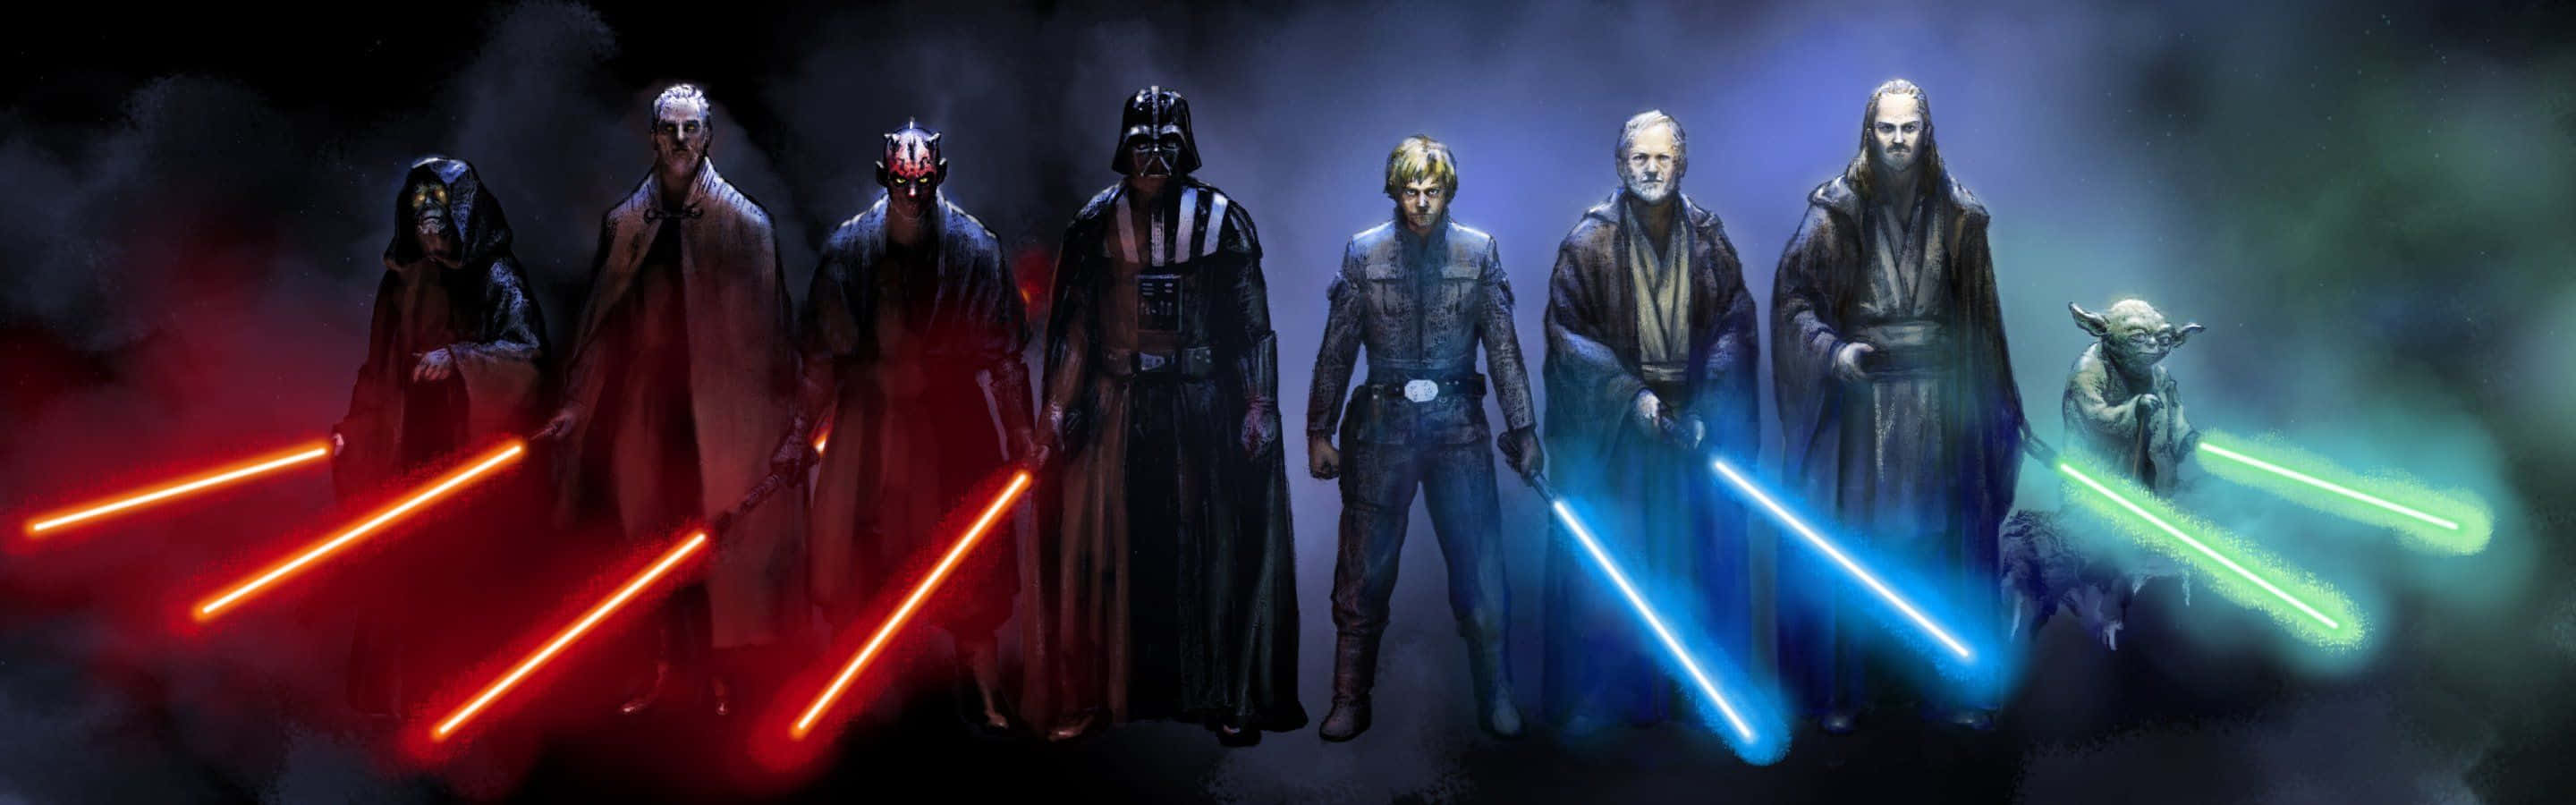 Sith And Jedi Star Wars Characters Cool Dual Monitor Wallpaper